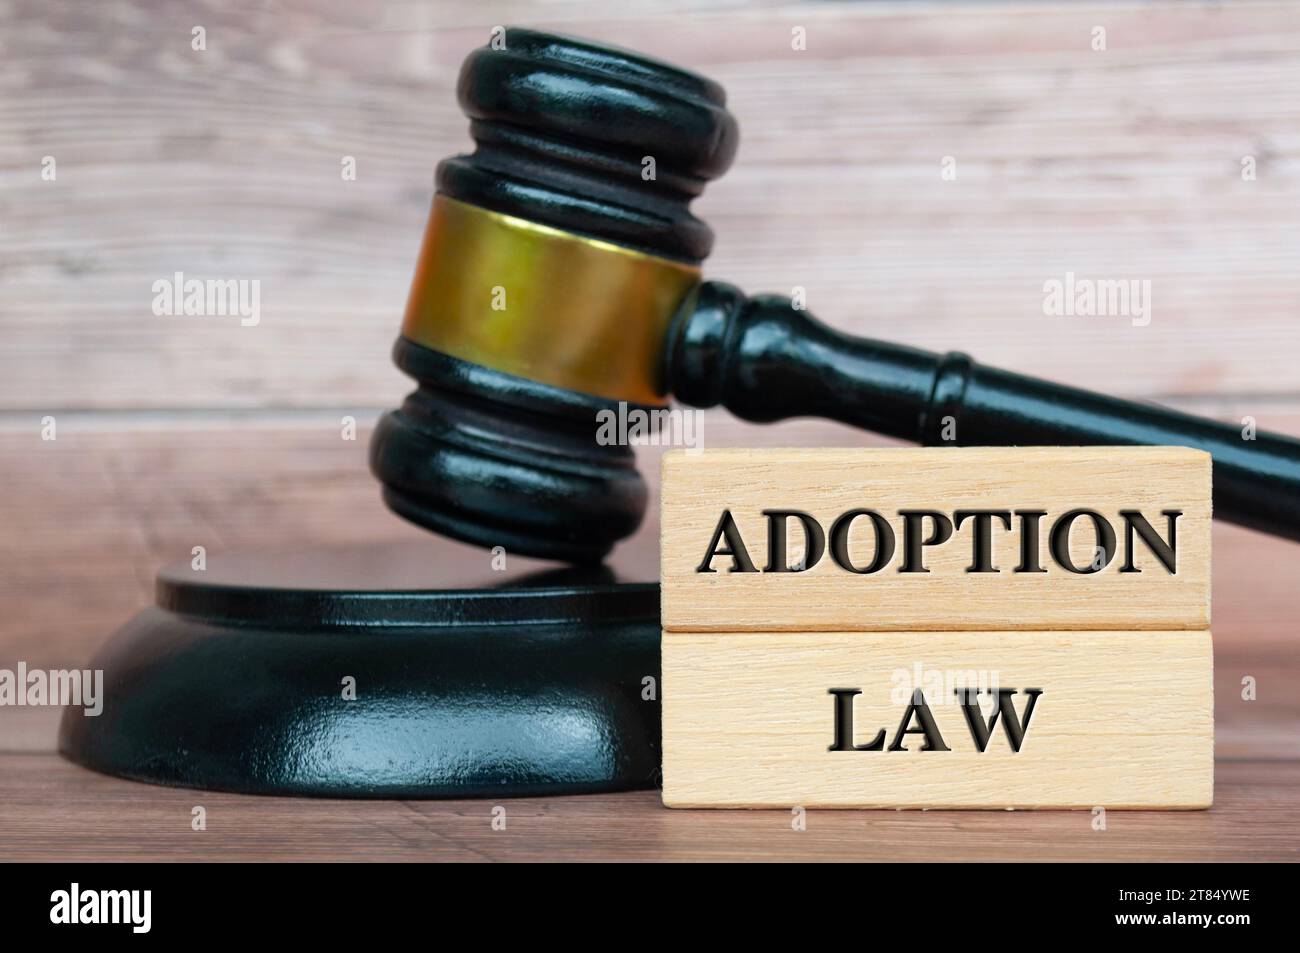 Adoption Law text engraved on wooden blocks. Stock Photo